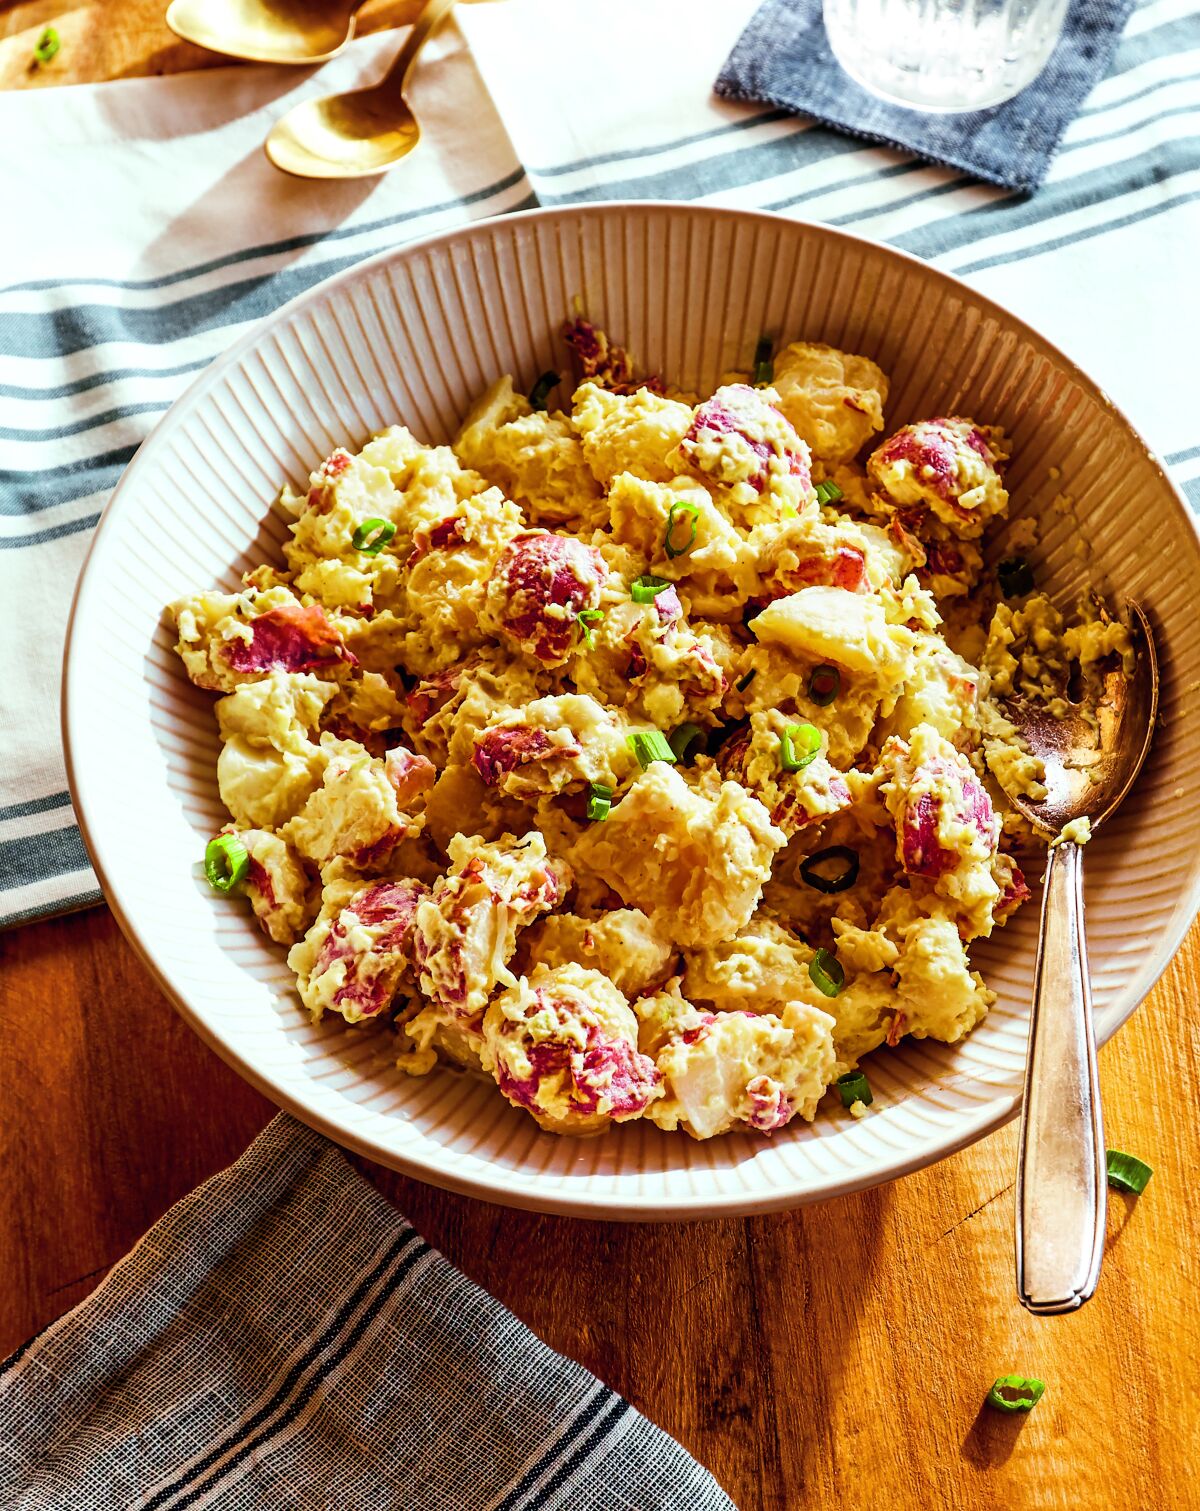  A bowl of potato salad made with red-skin potatoes.